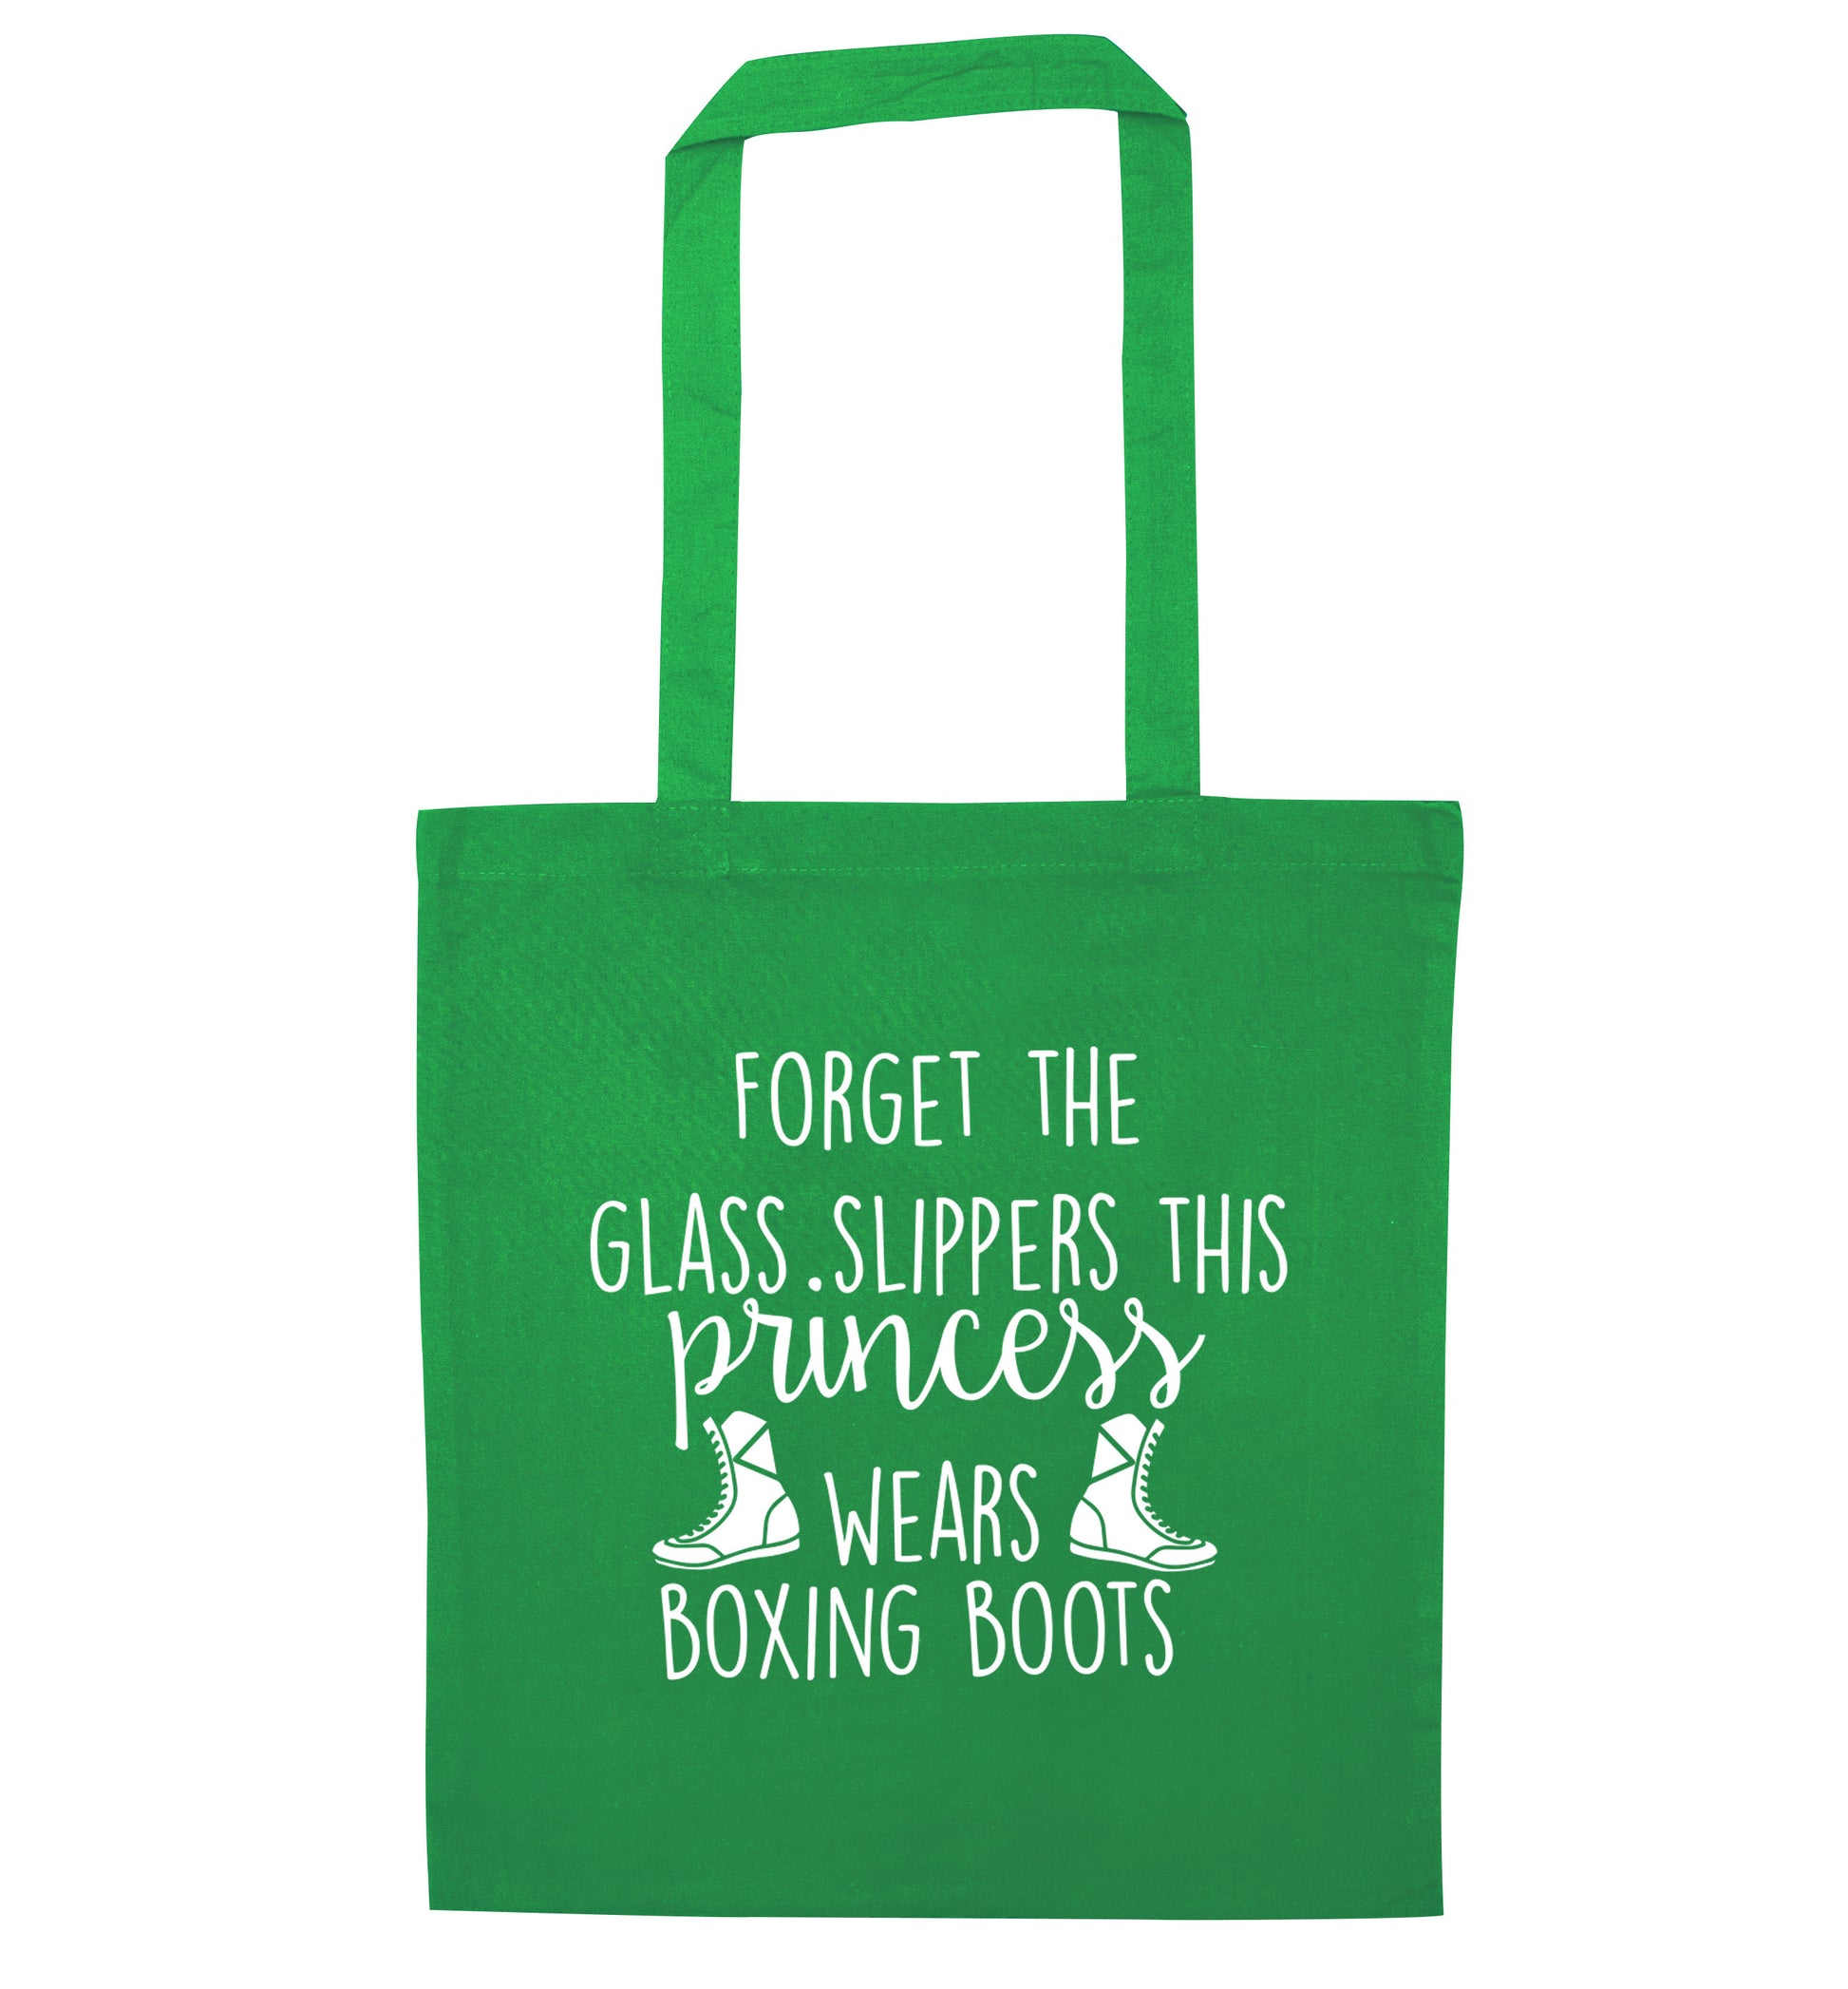 Forget the glass slippers this princess wears boxing boots green tote bag